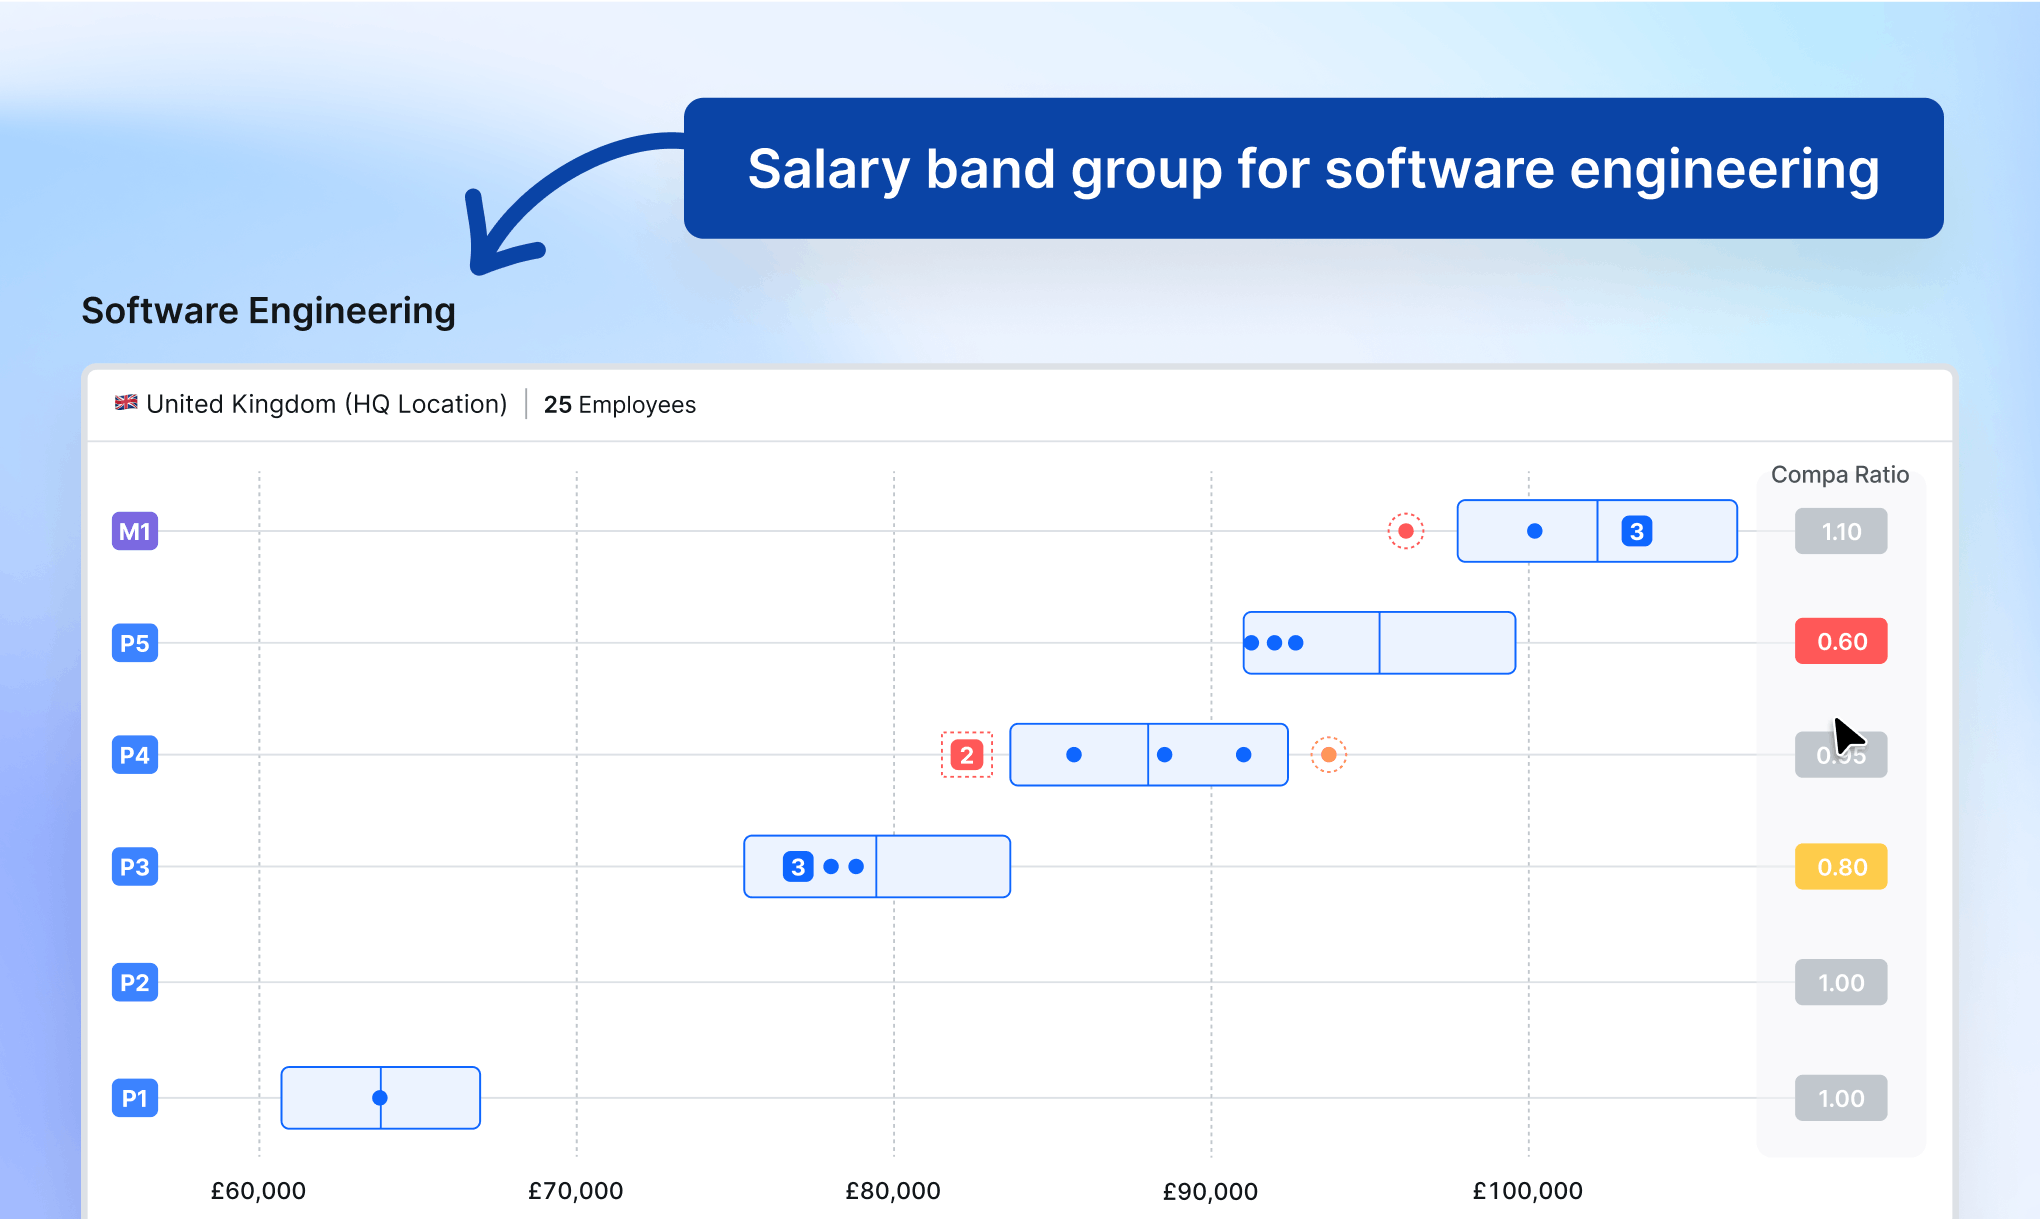 A set of salary bands for a company's software engineering function.